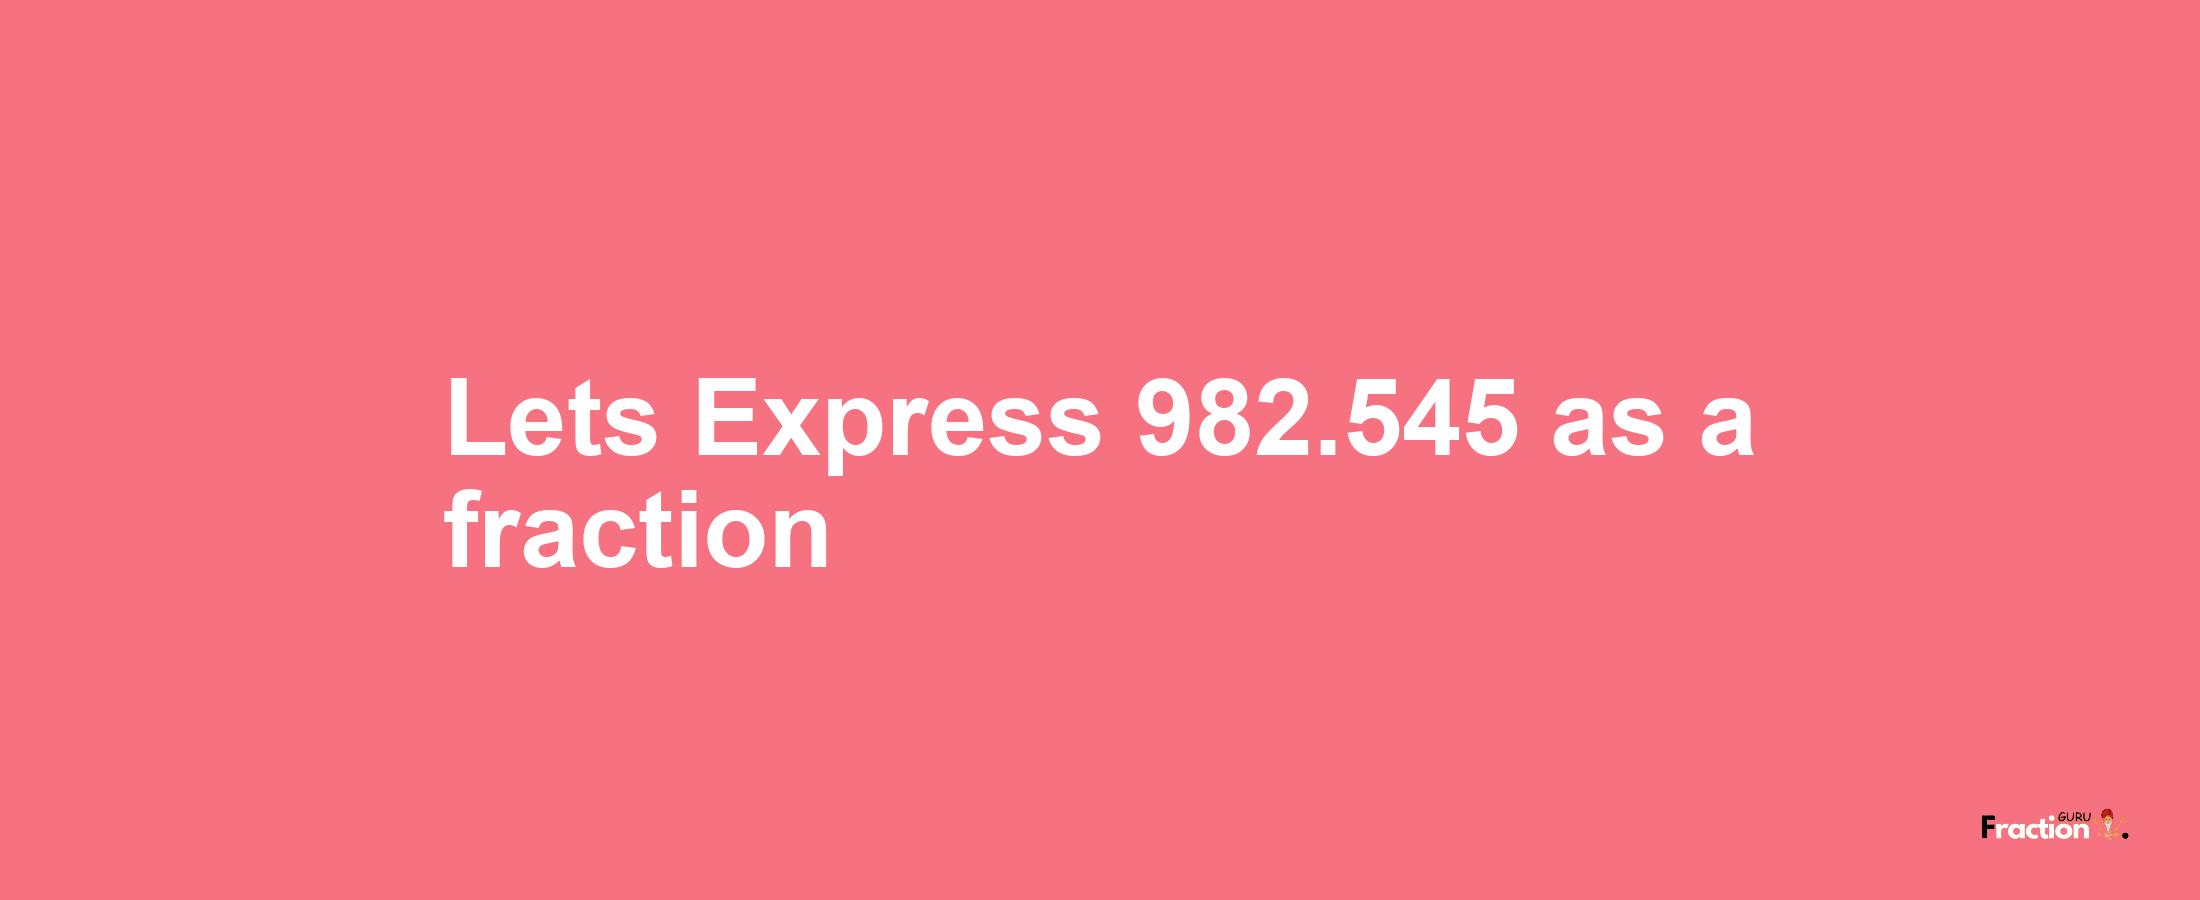 Lets Express 982.545 as afraction